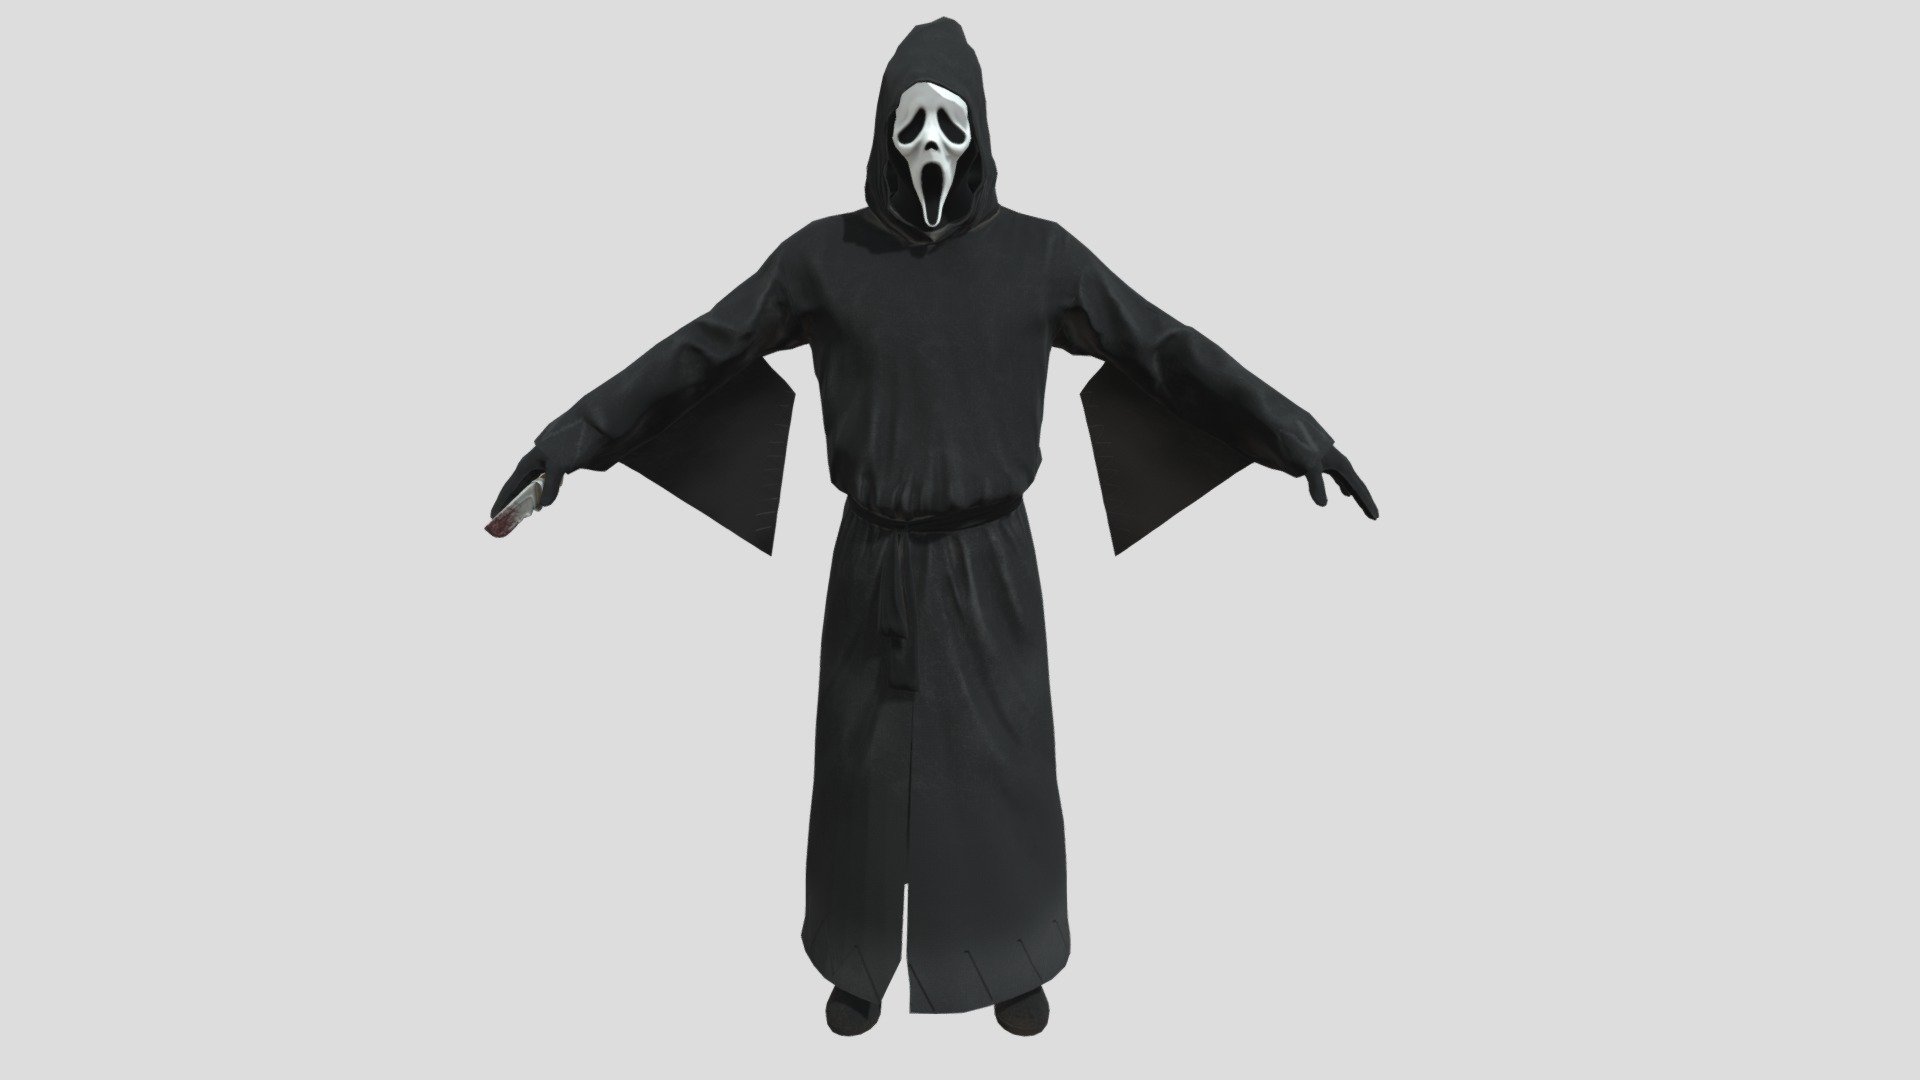 Ghostface Pngtuber Model for Twitch Streaming (Instant Download) 